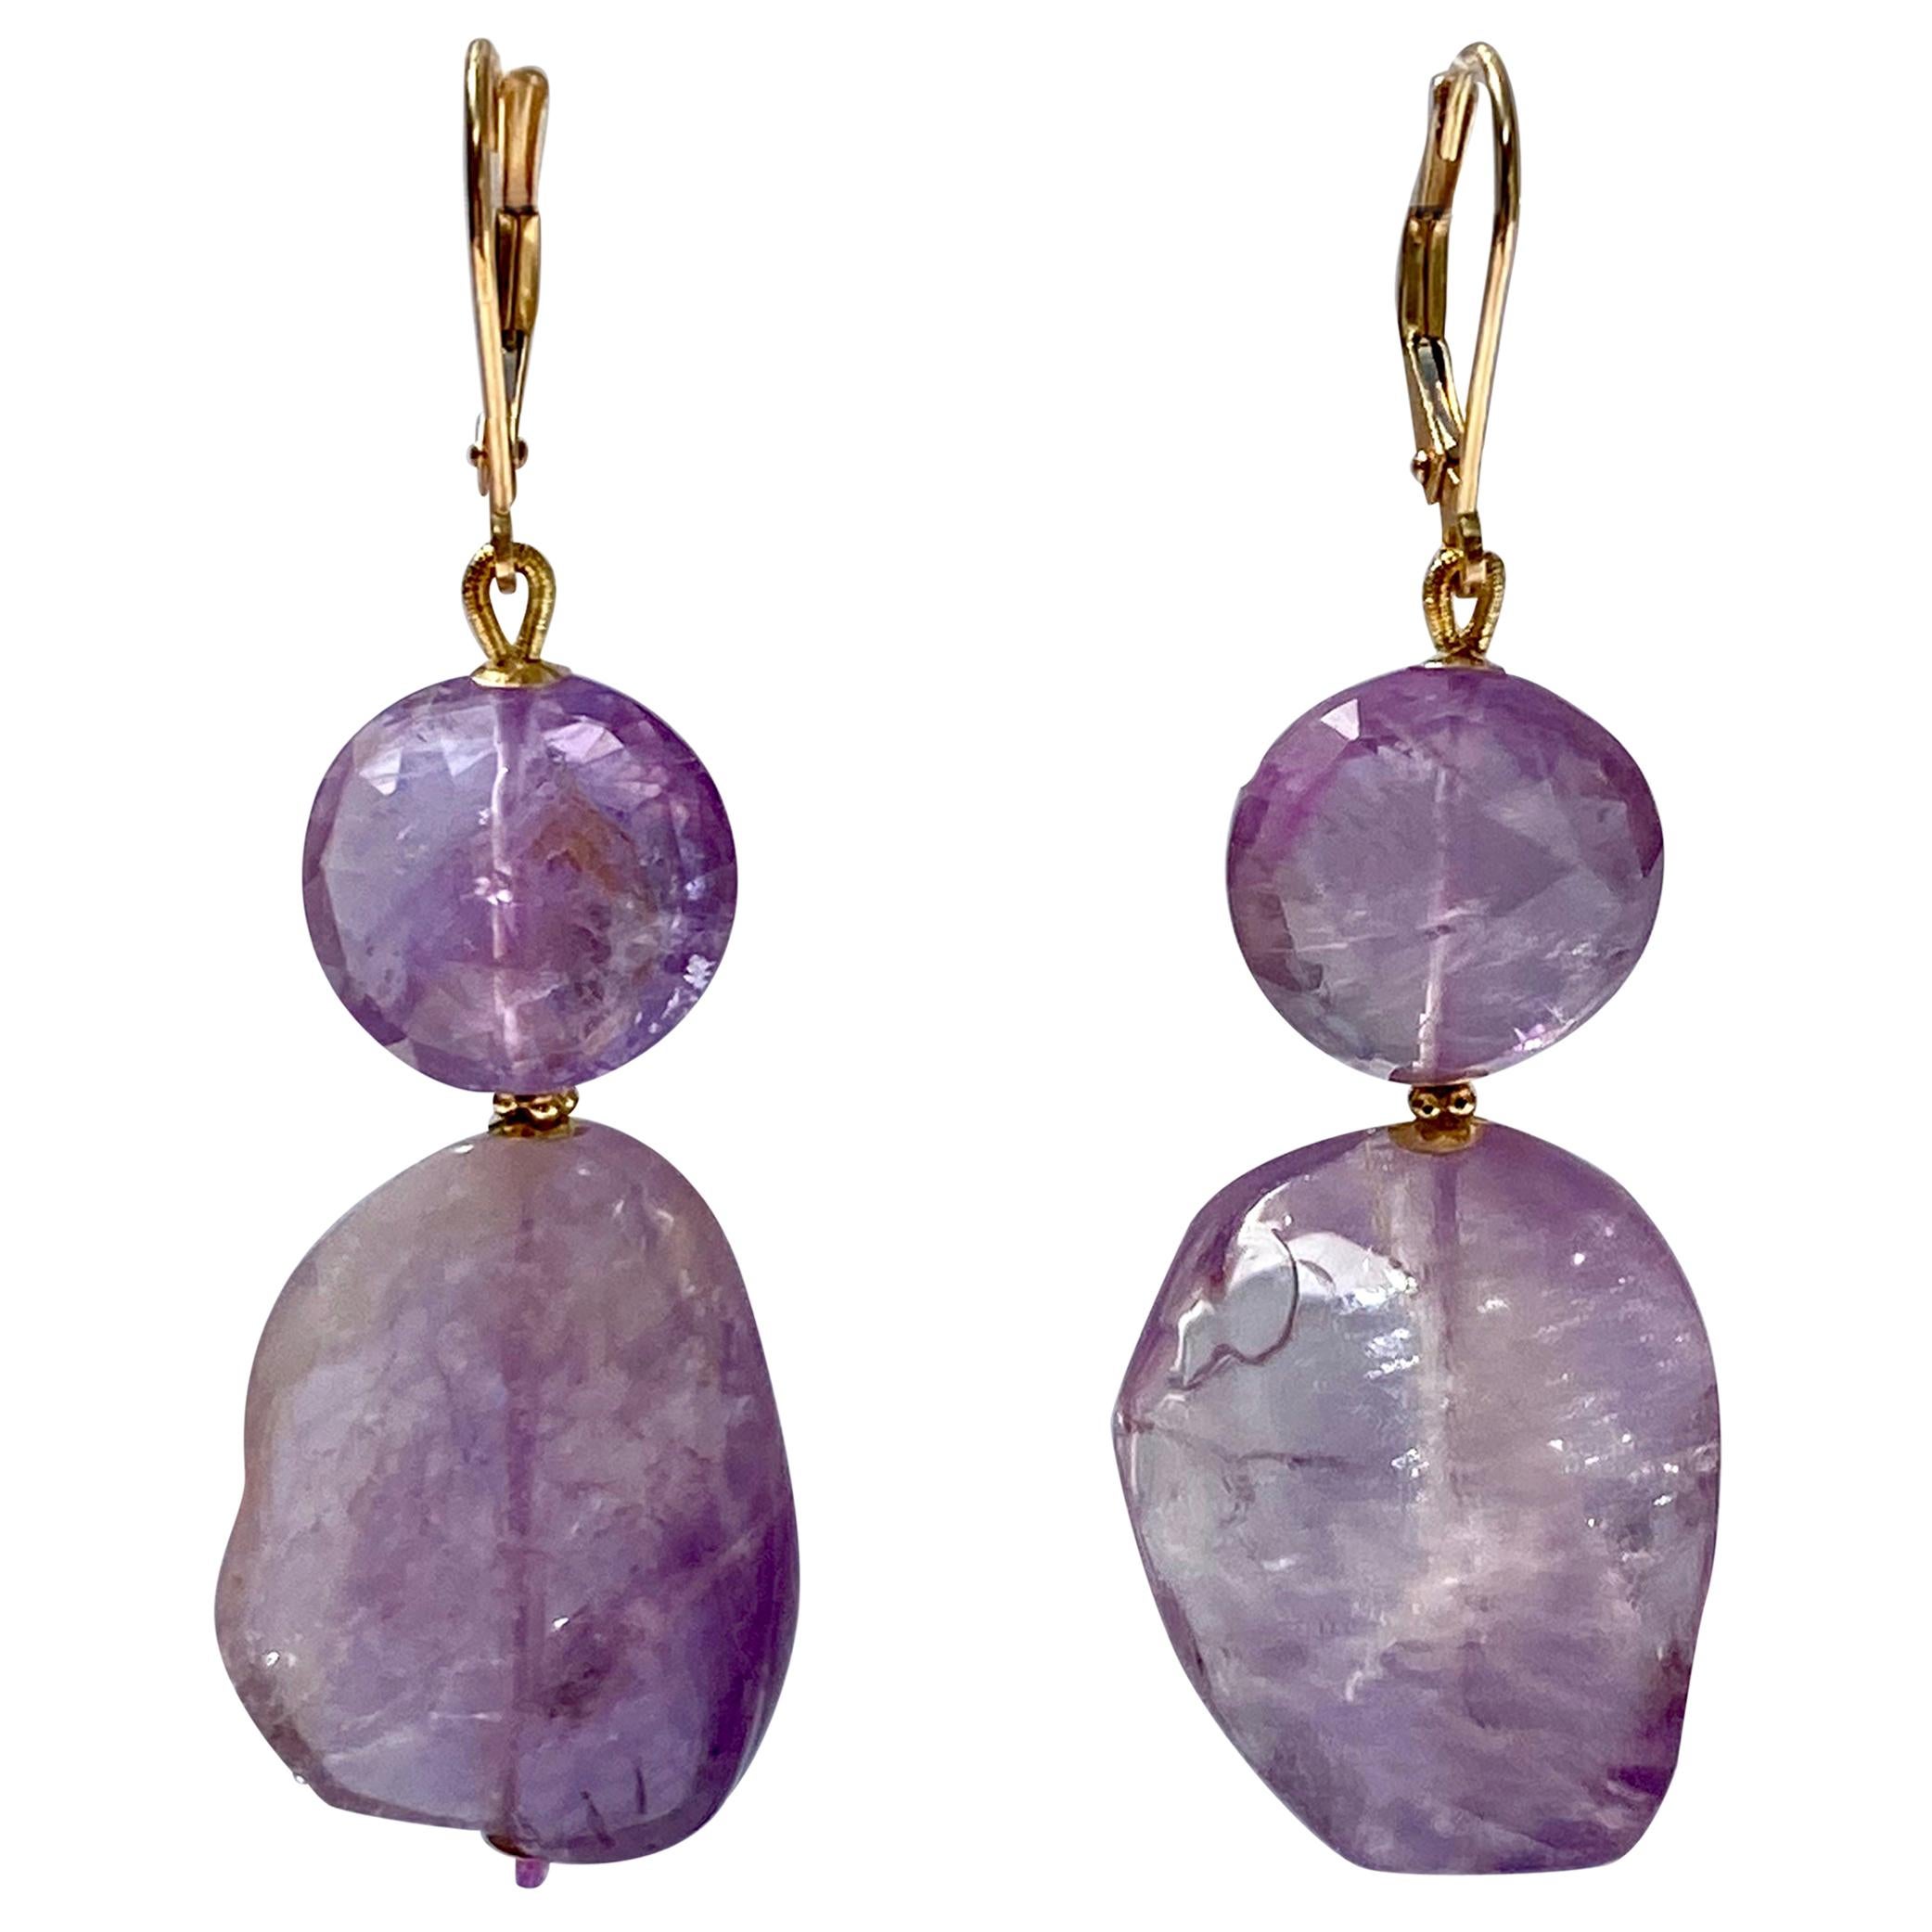 Marina J. Double Amethyst Bead Earrings with 14 Karat Gold Lever-Back and Beads